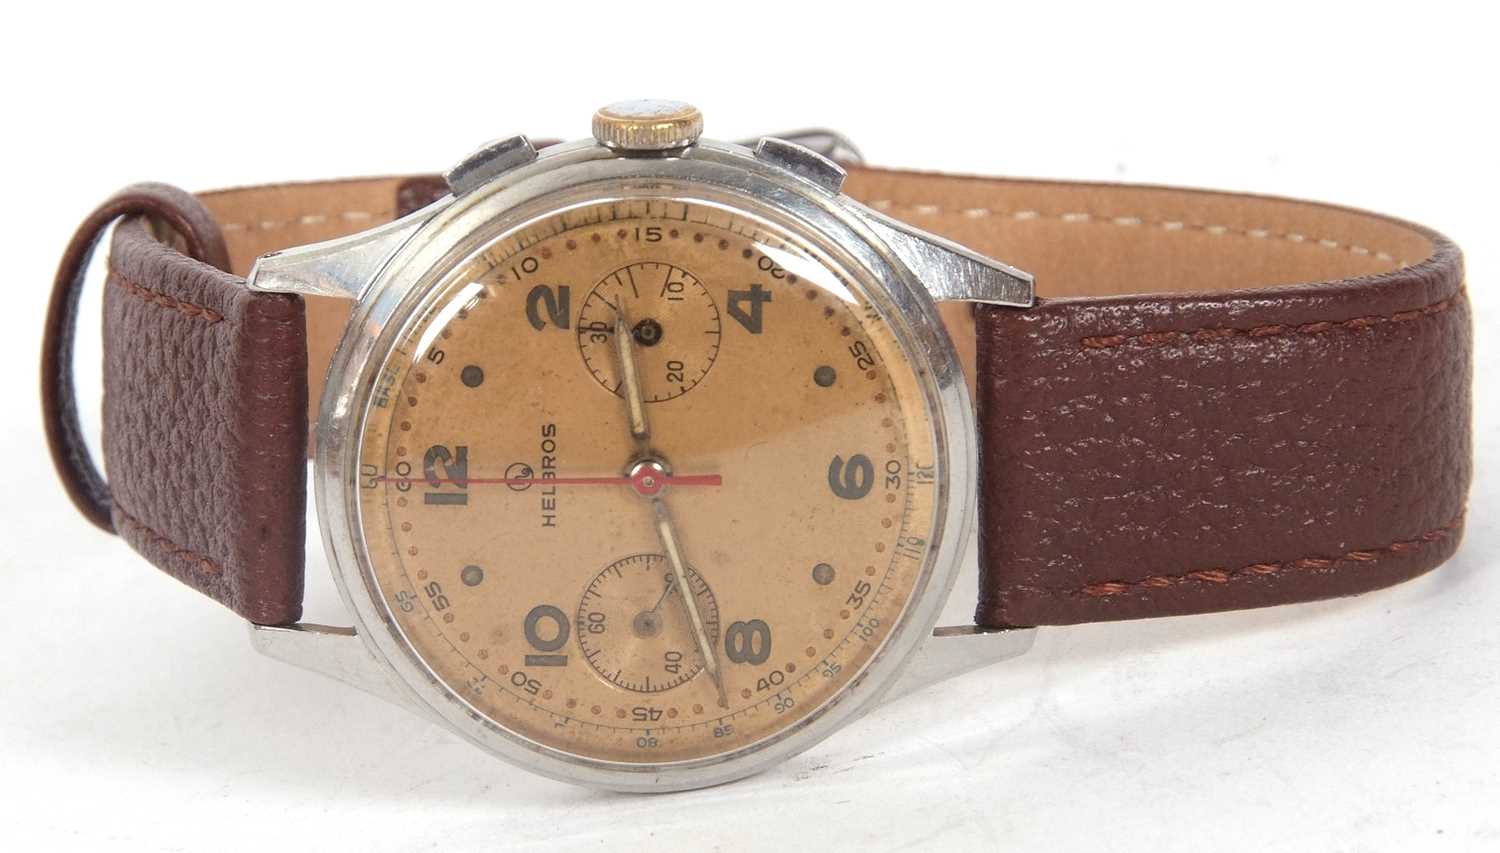 Helbros Chronograph wristwatch, the watch has a manually crown wound movement and a stainless